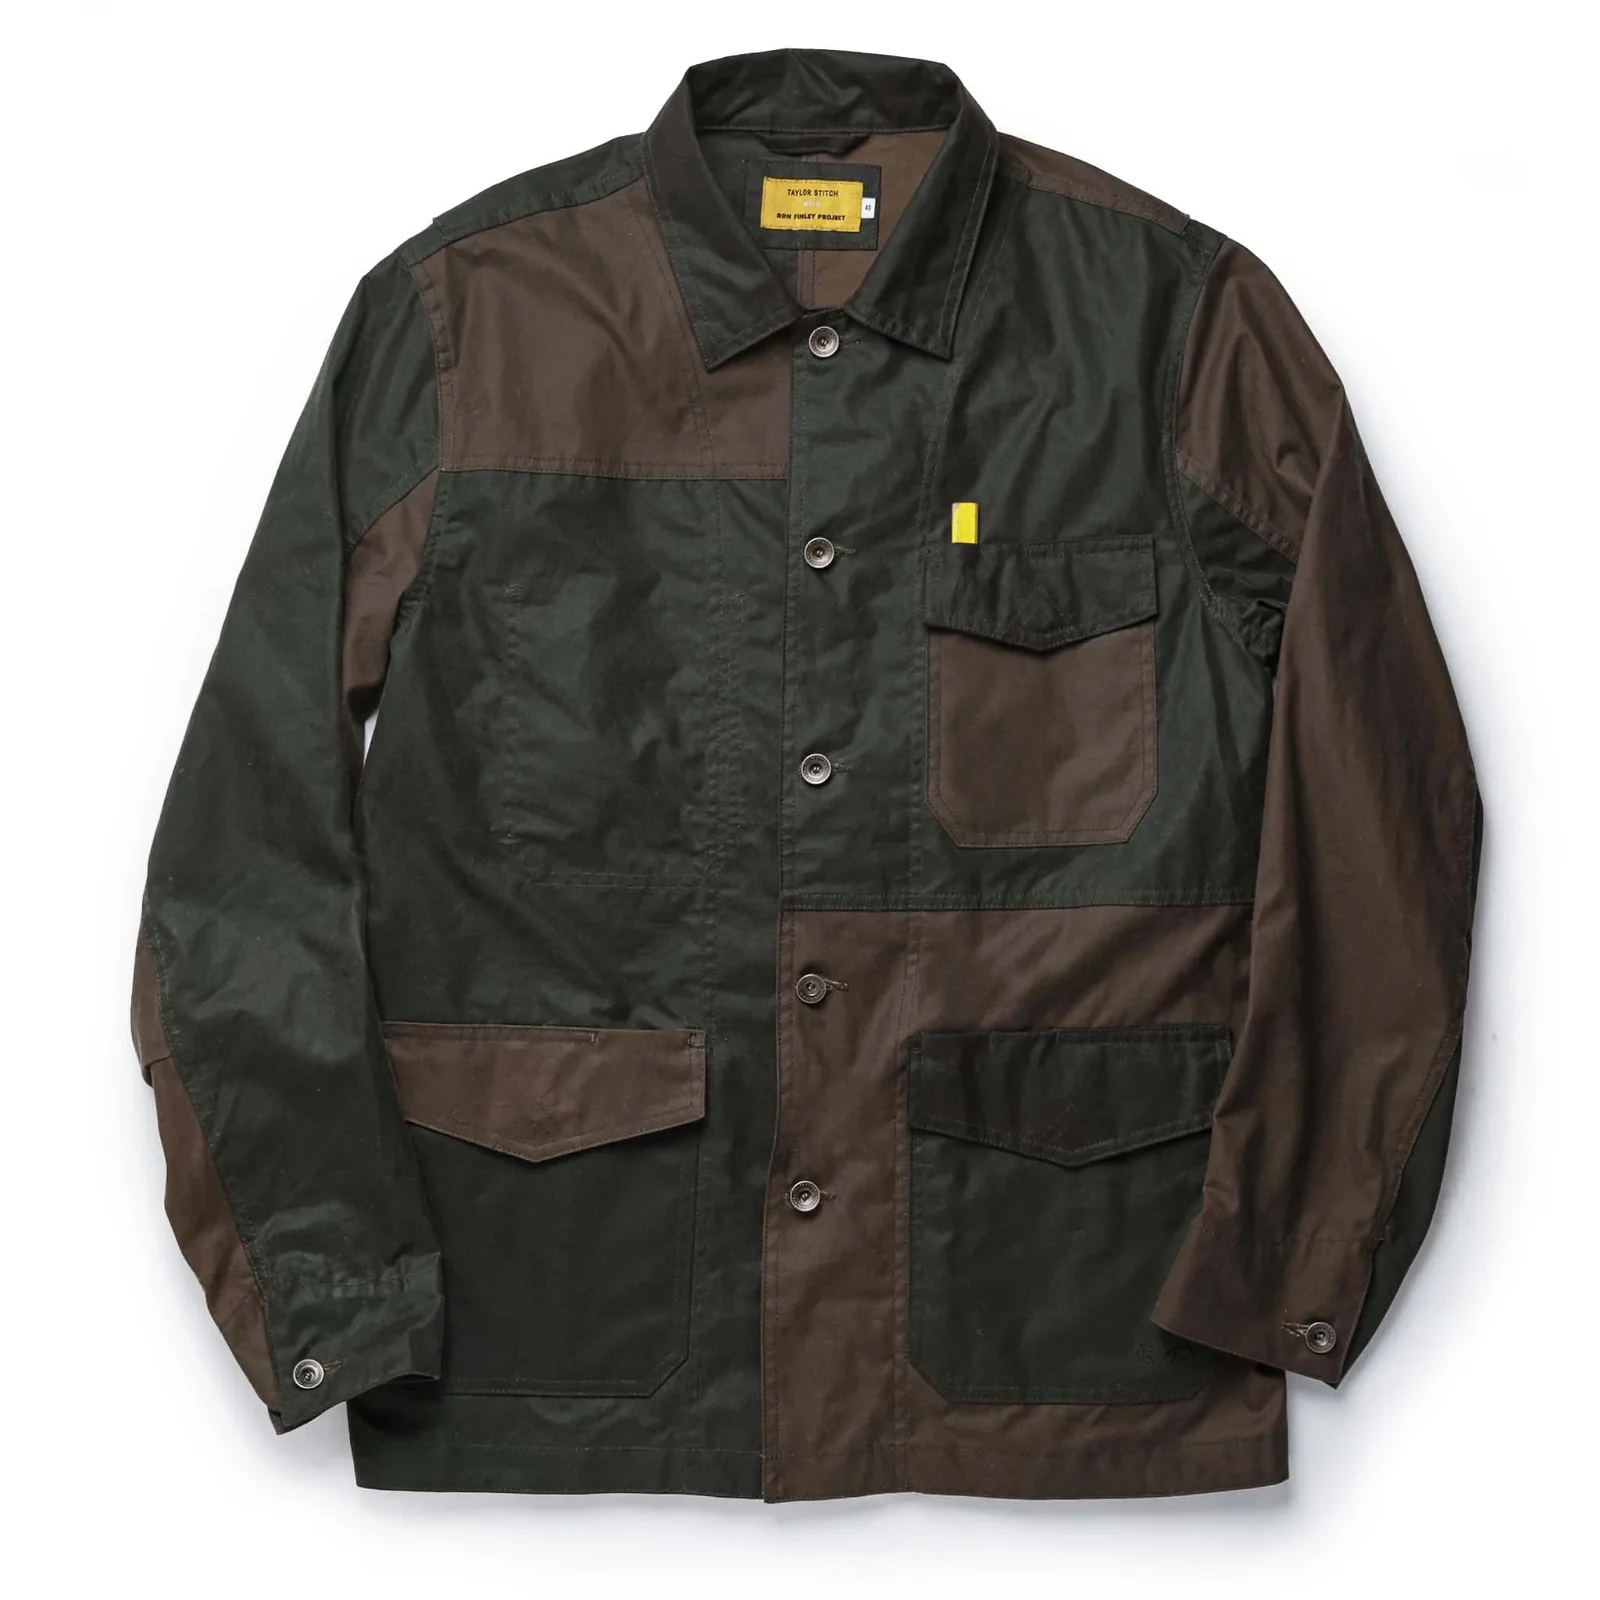 Image of The Task Jacket in Waxed Khaki and Olive Patchwork